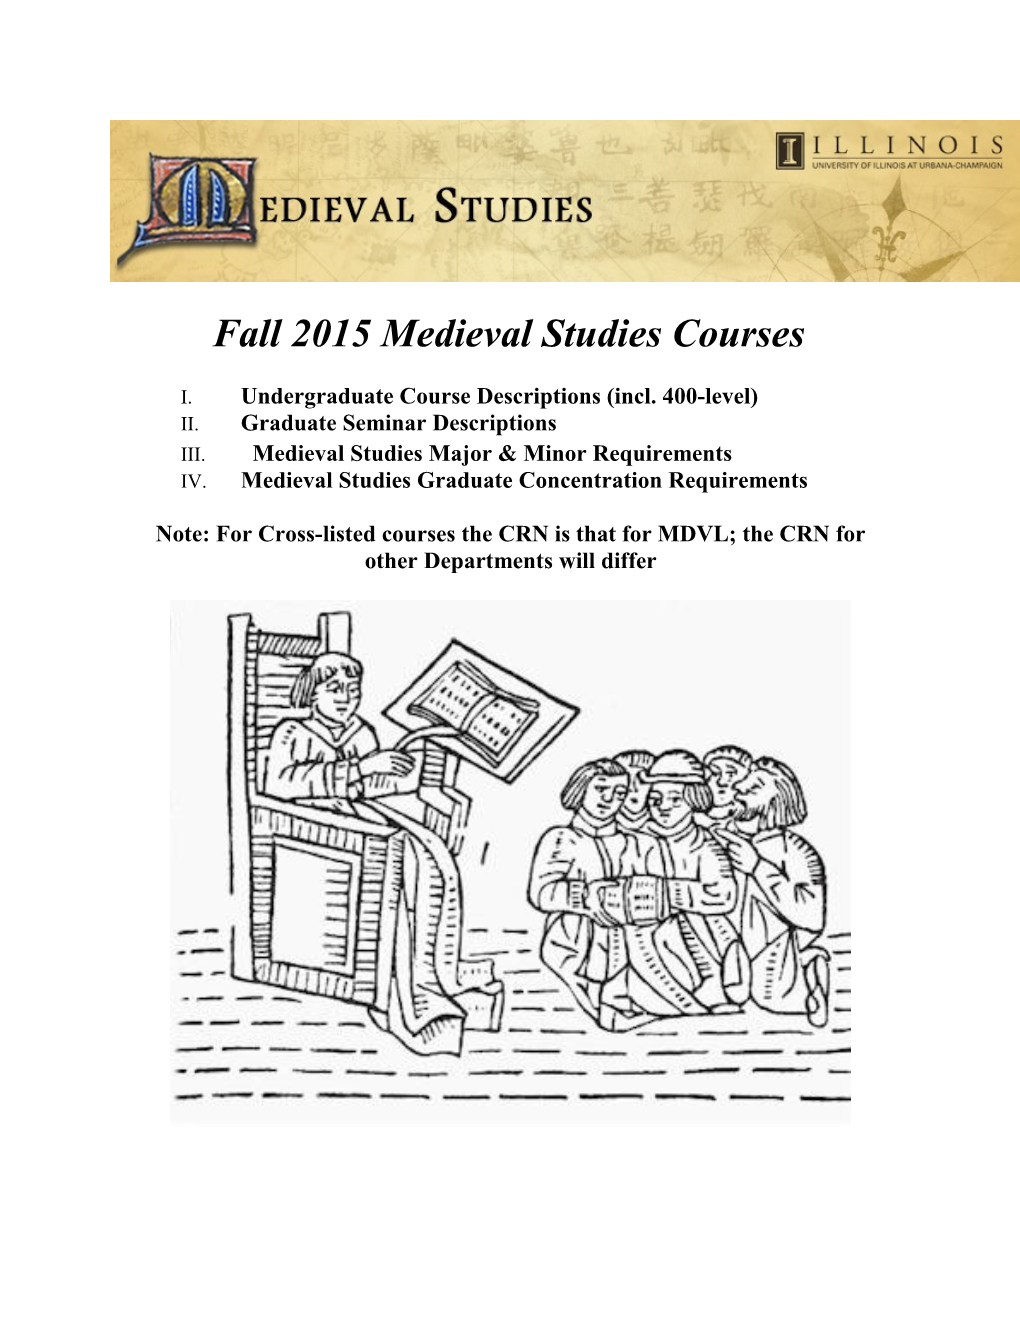 Fall 2015 Medieval Studies Courses